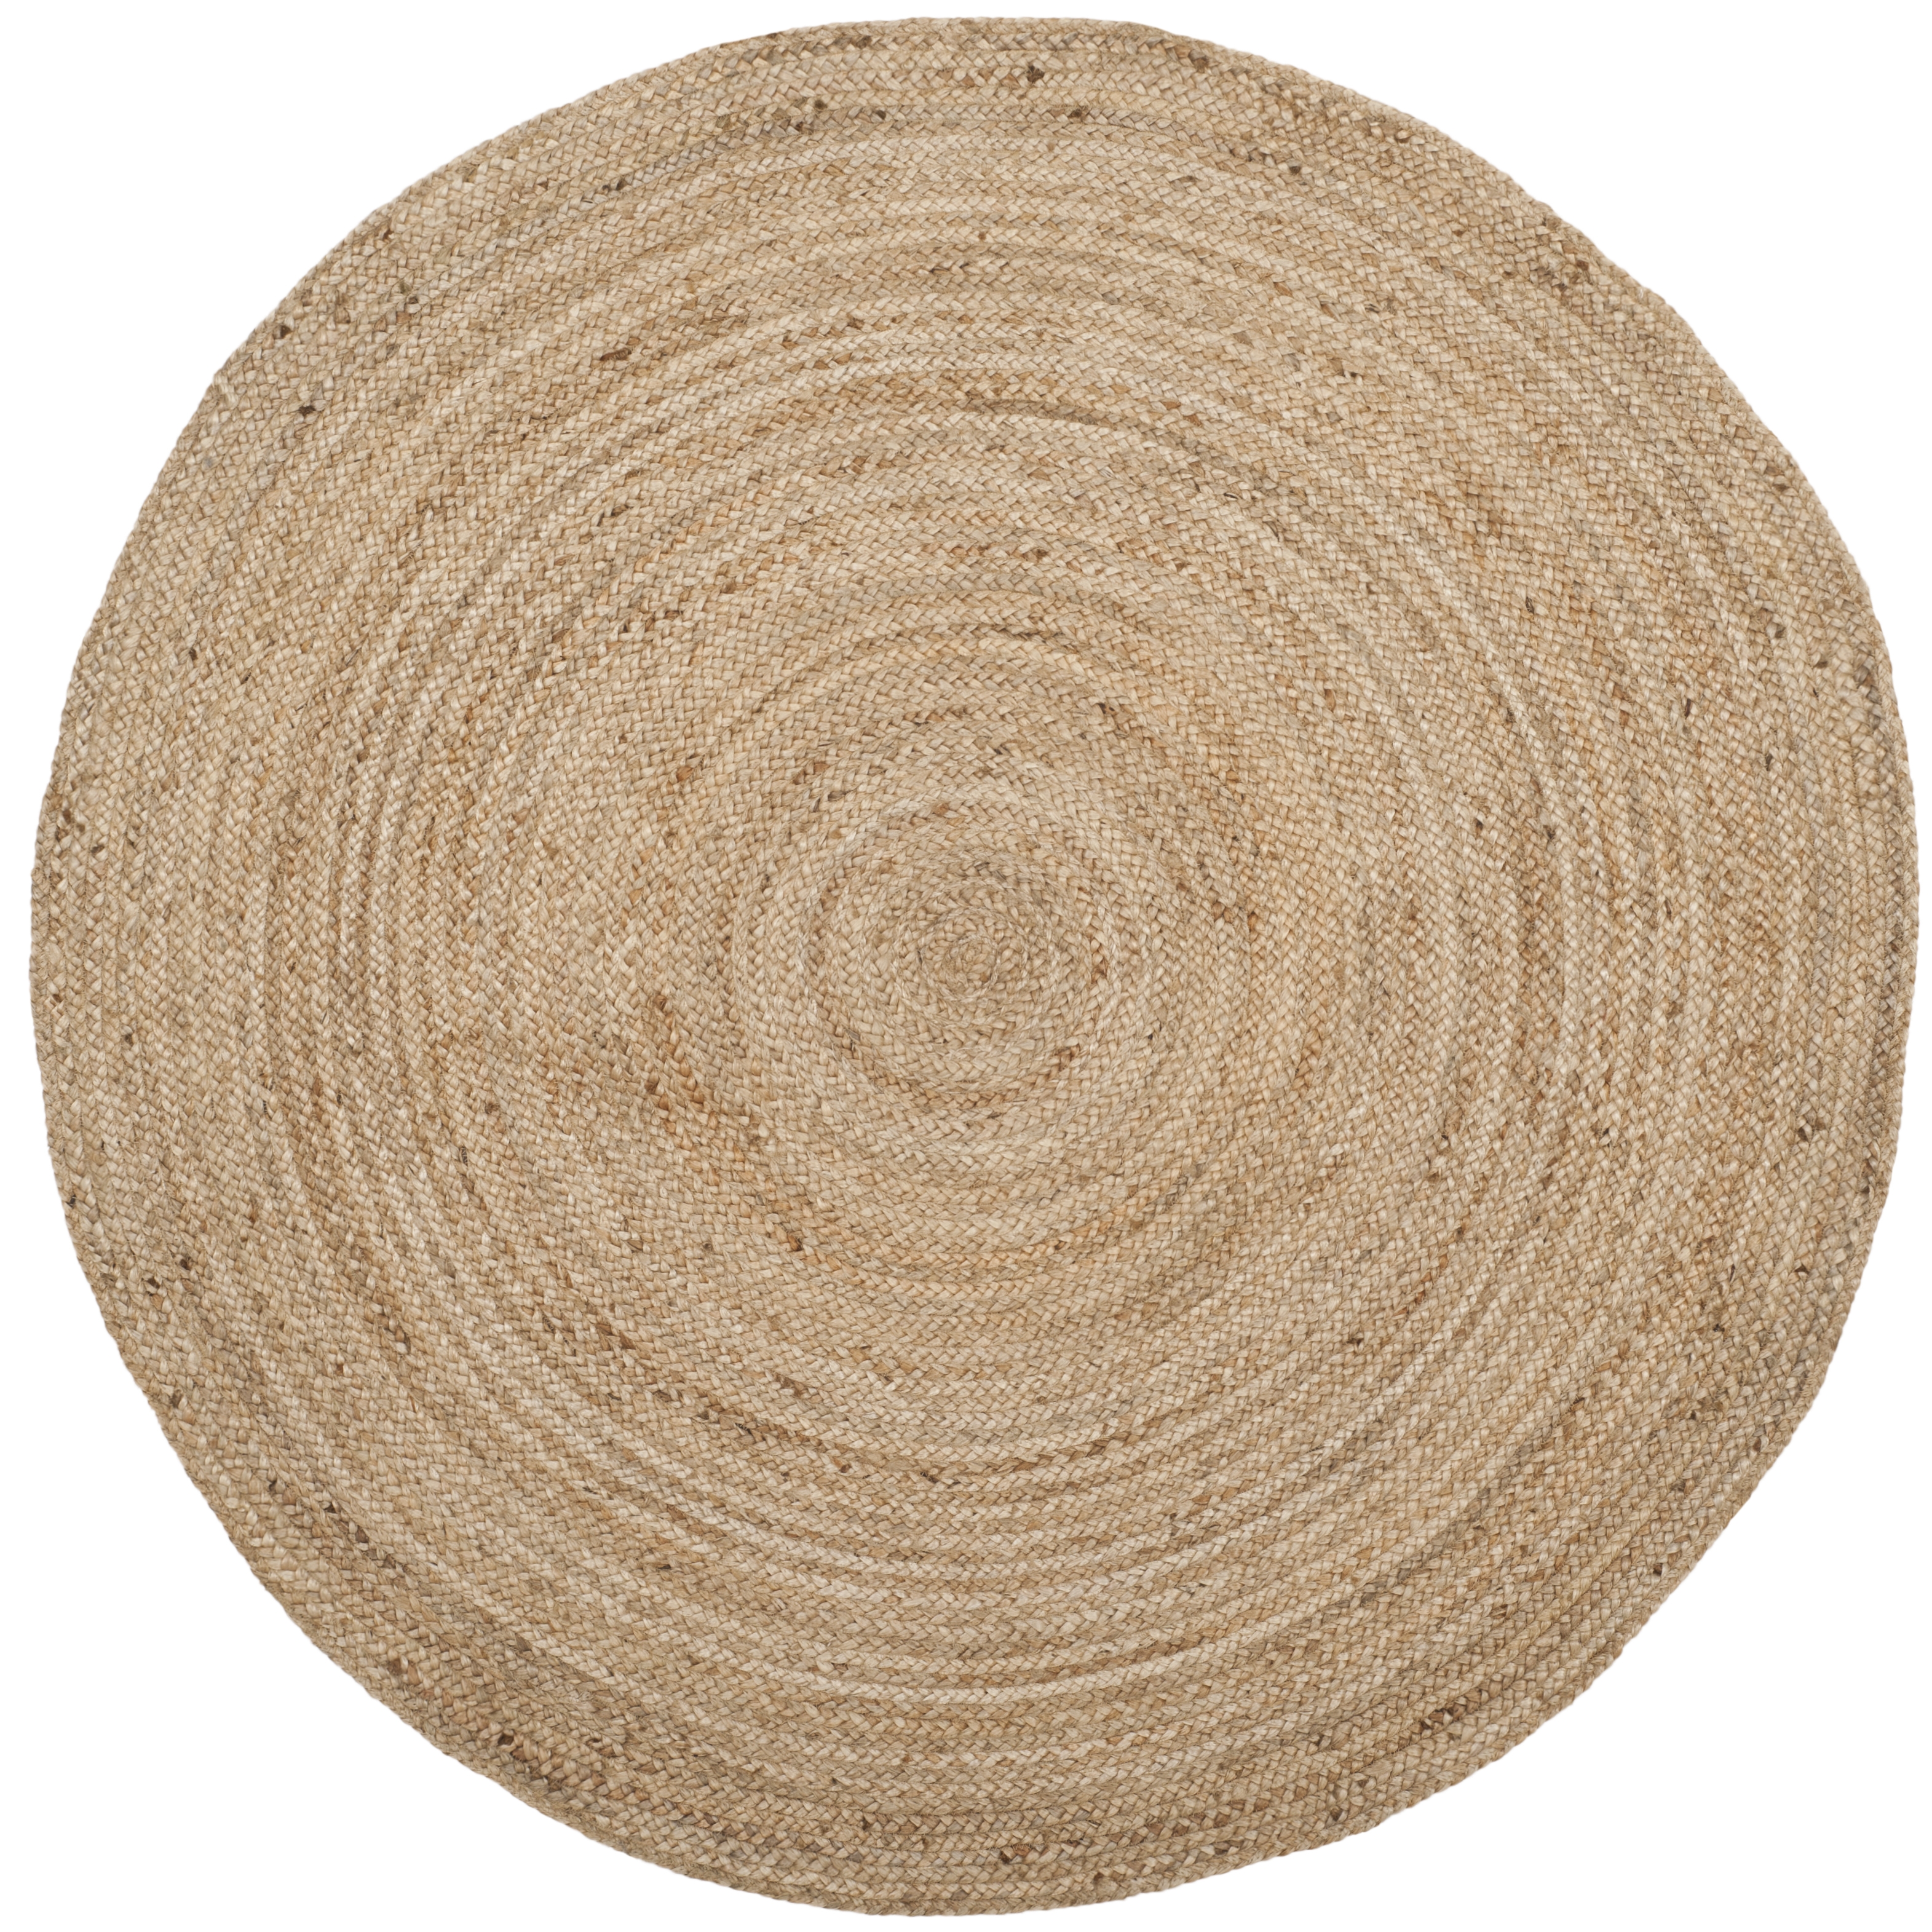 Arlo Home Hand Woven Area Rug, NF801N, Natural/Natural,  5' X 5' Round - Image 0